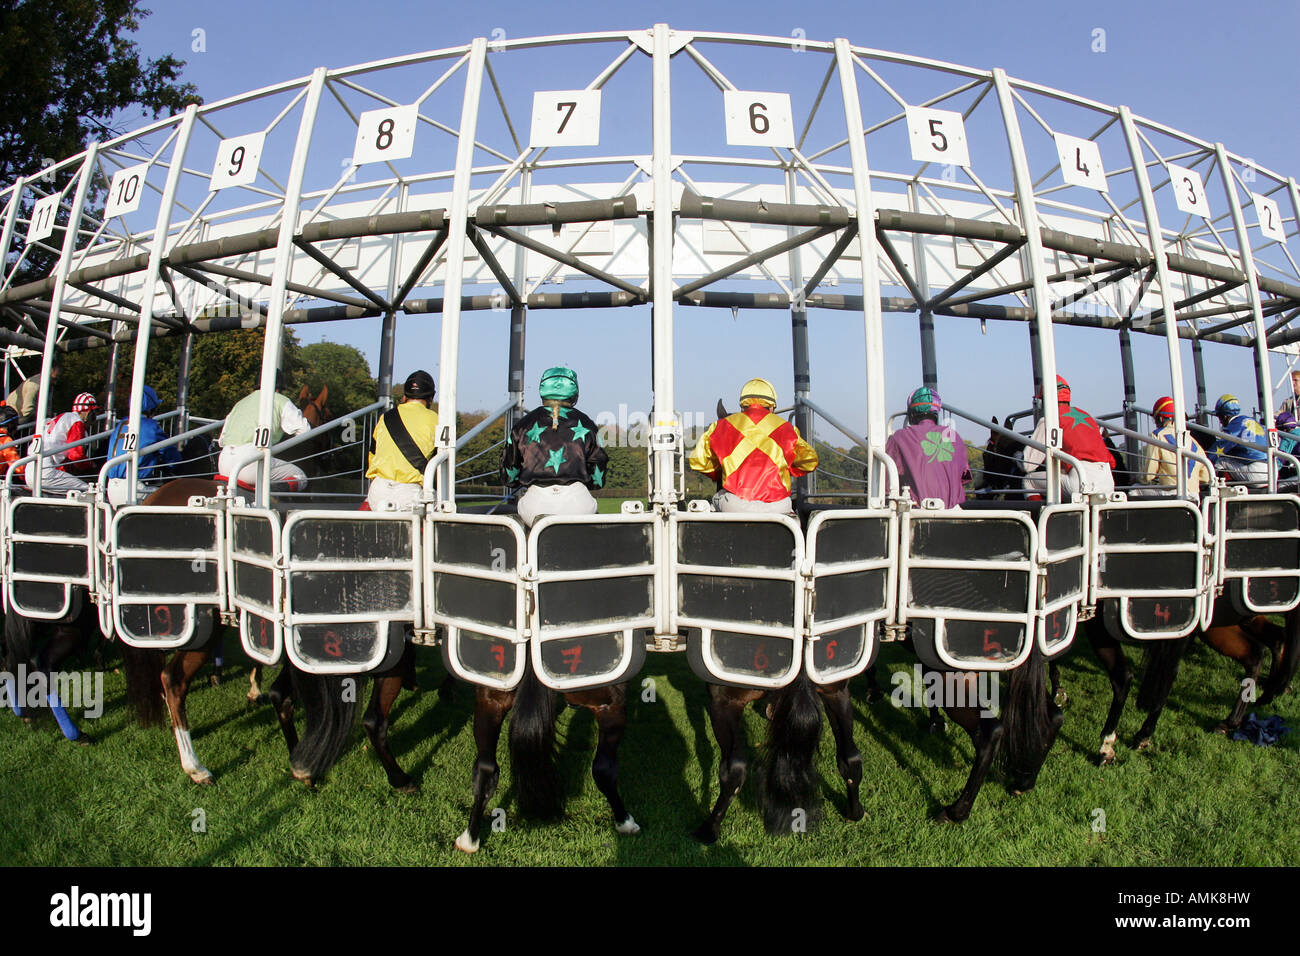 Race horses in the starting gates, Leipzig, Germany Stock Photo